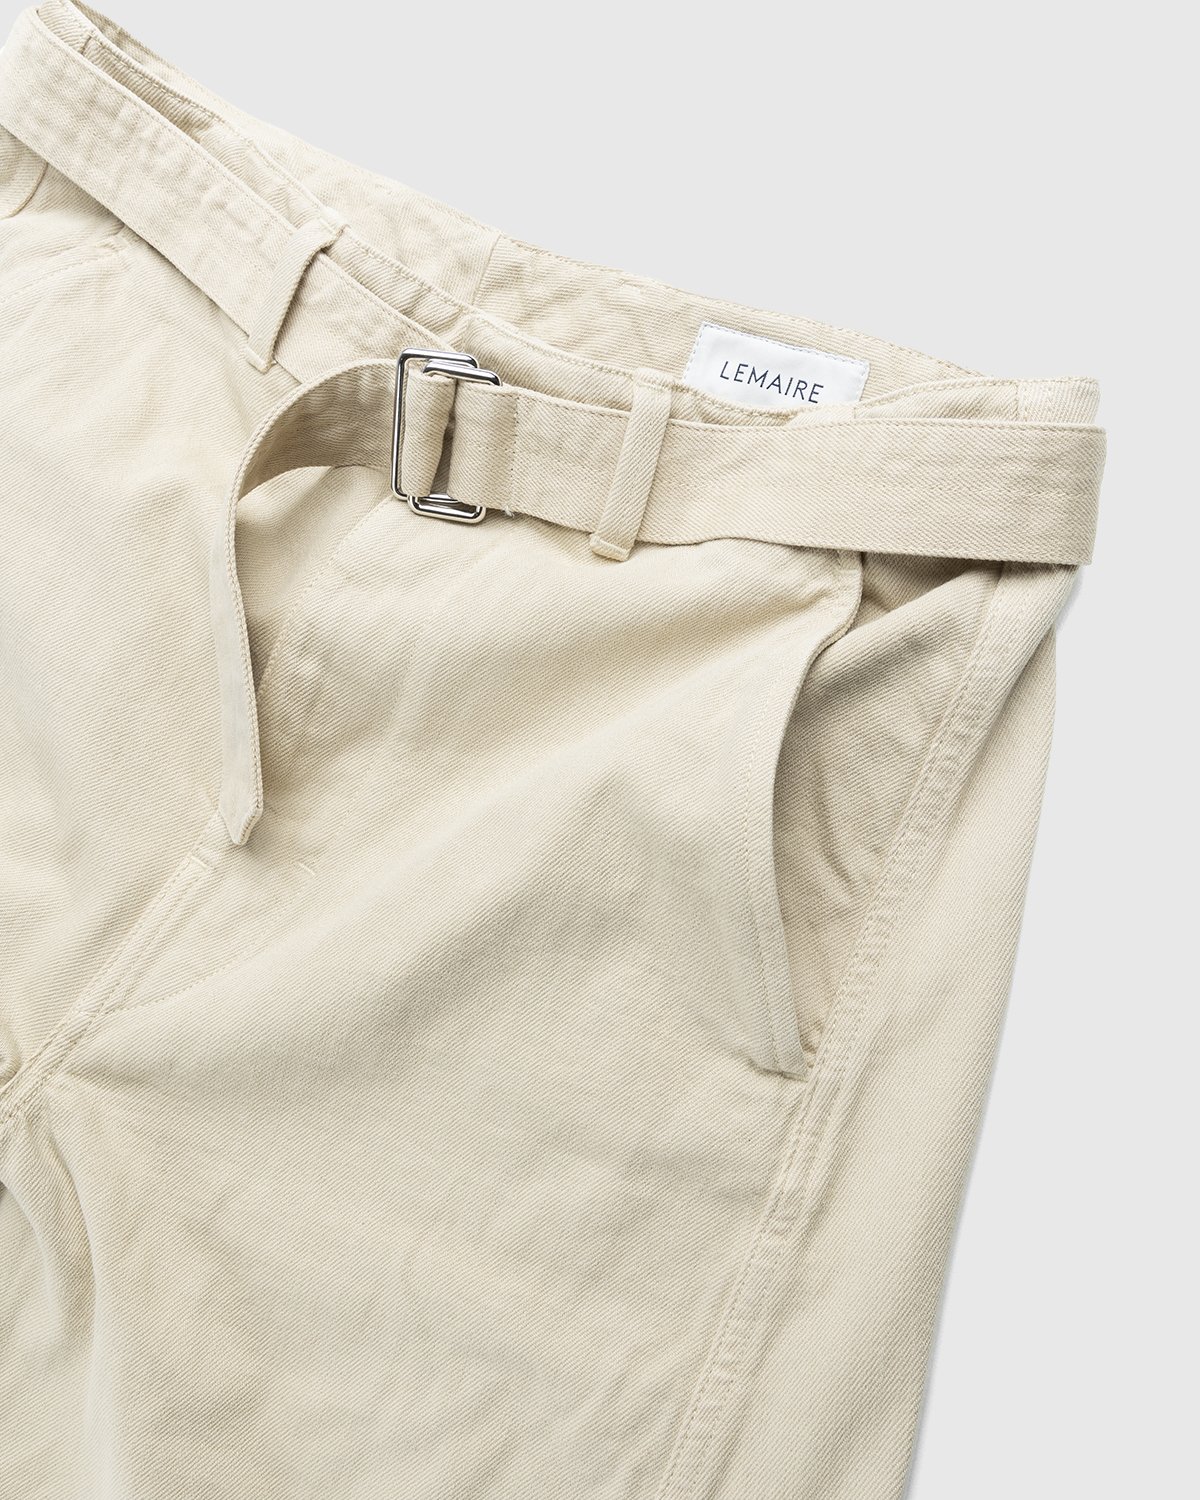 Lemaire - Rinsed Denim Twisted Pants Saltpeter - Clothing - Beige - Image 4